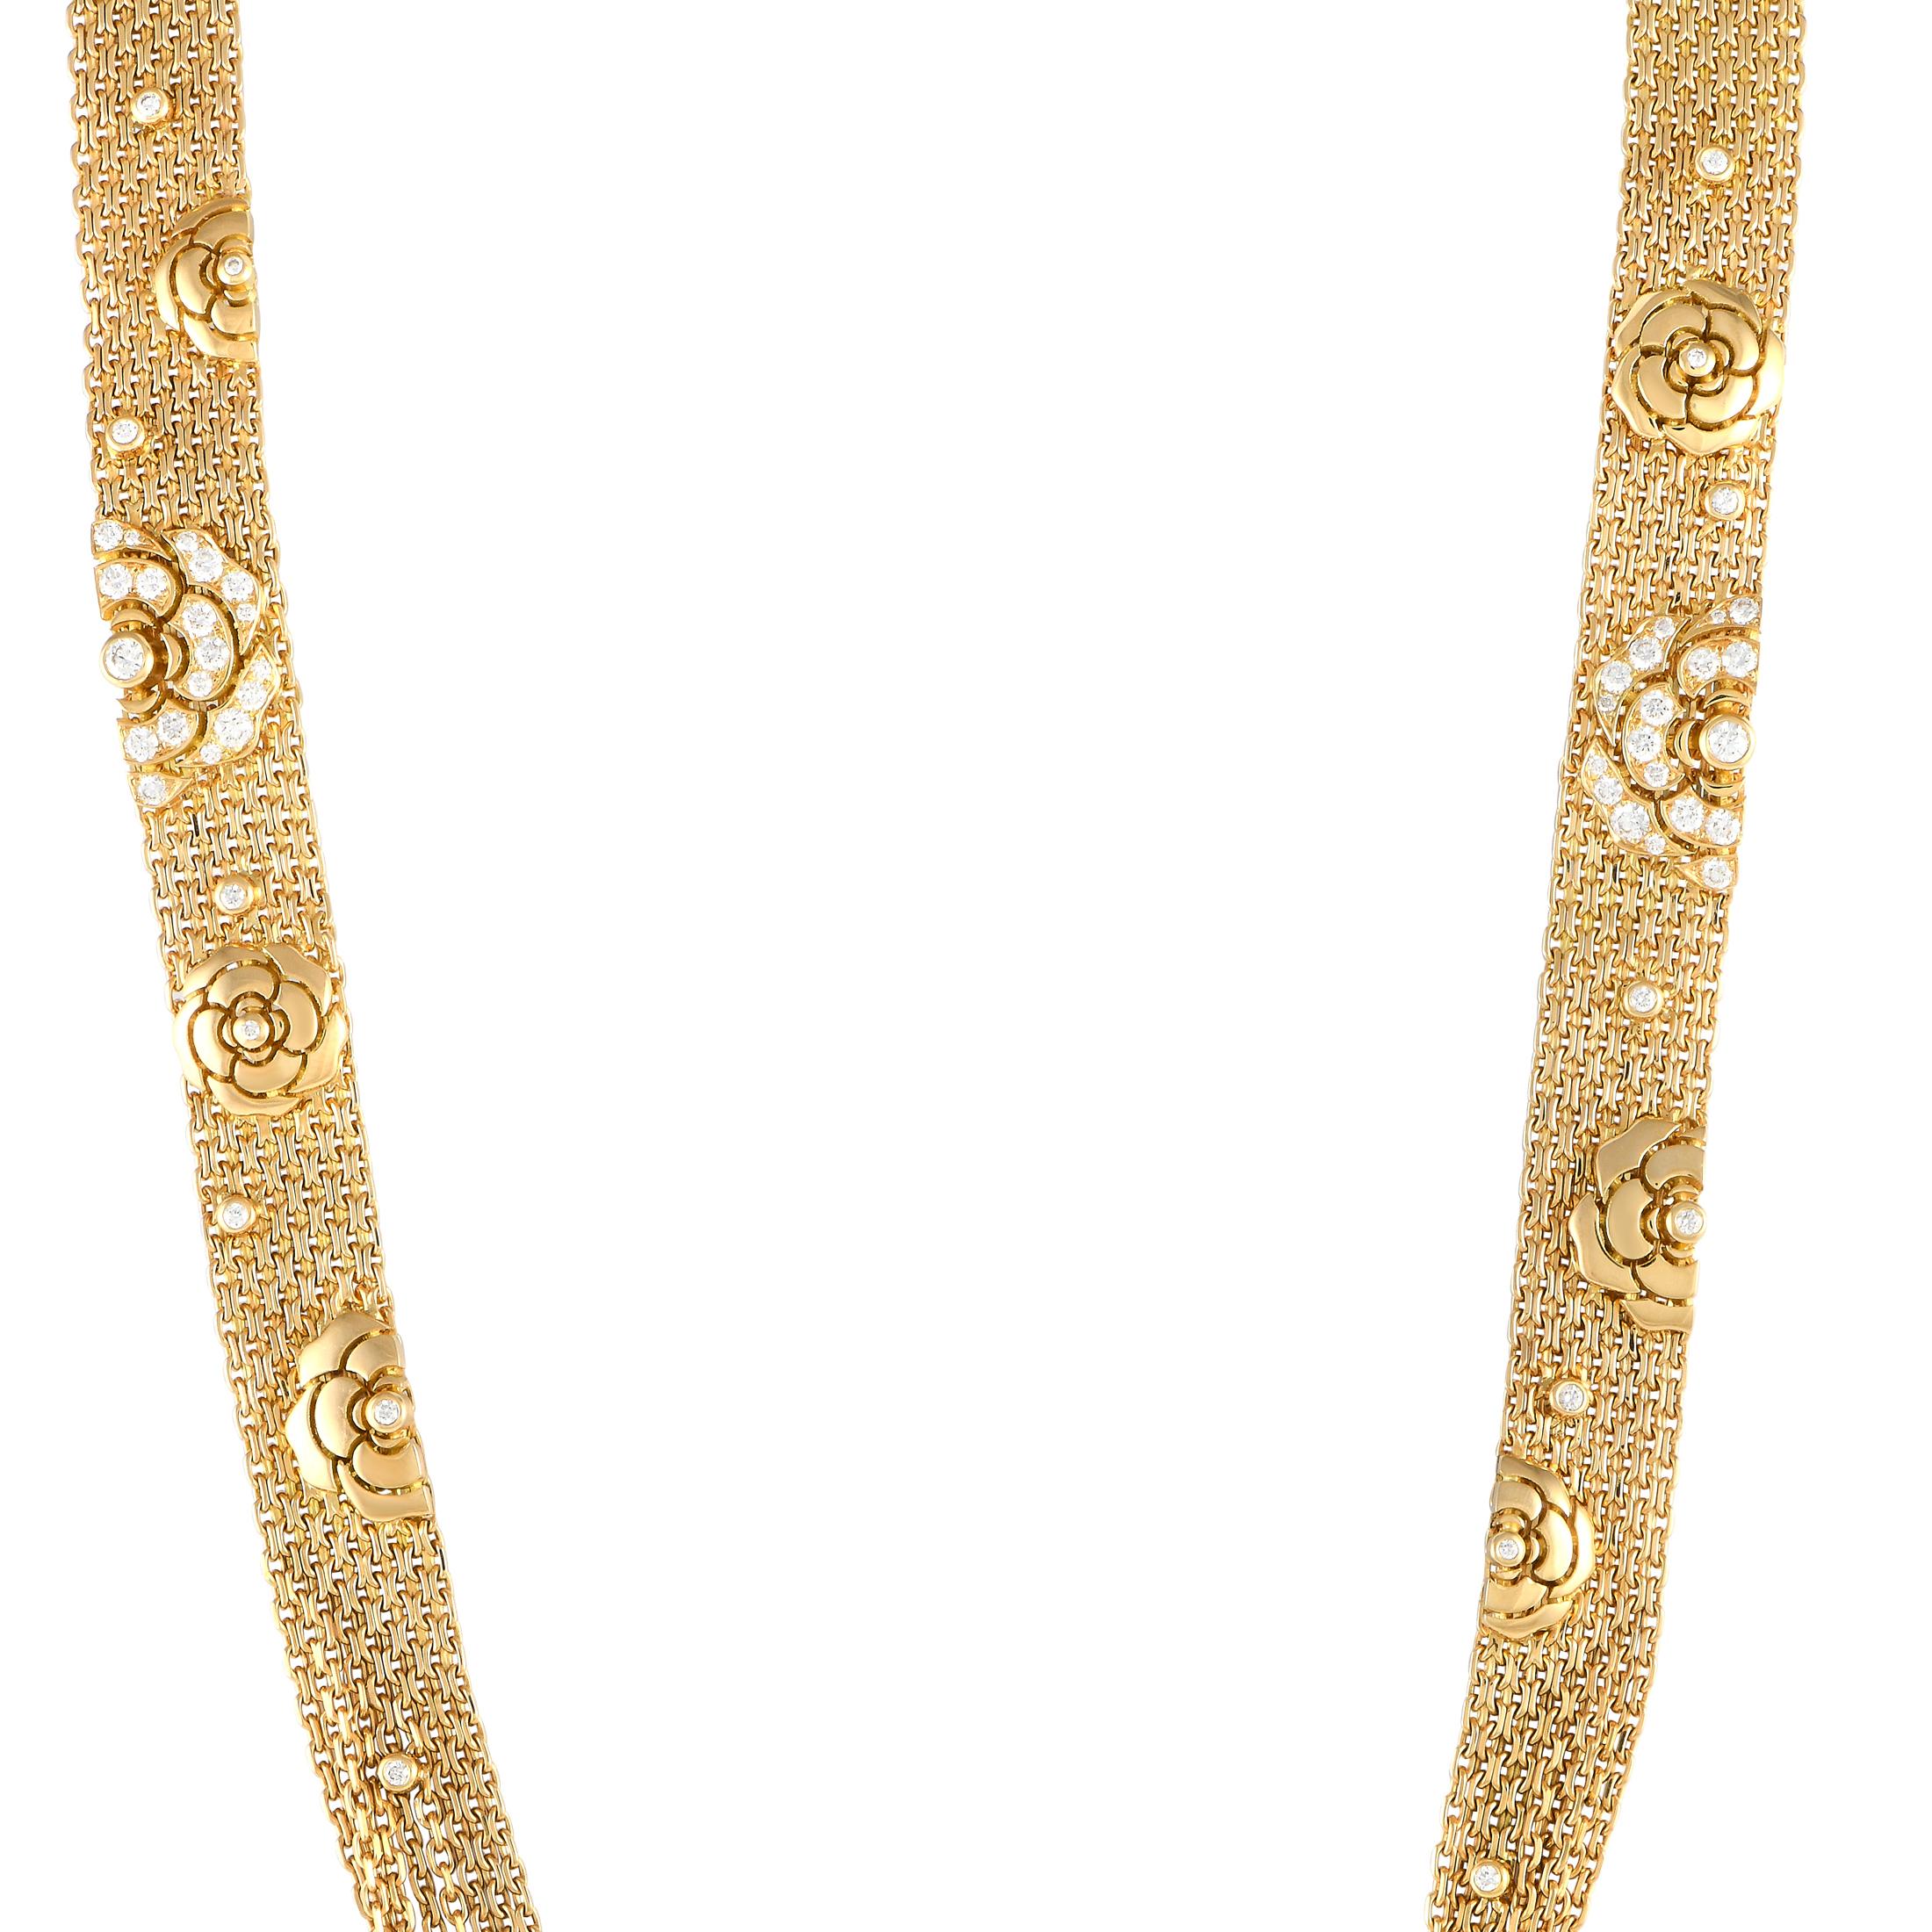 There’s something visually stunning about this bold, breathtaking Chanel Impression De Camila necklace. Measuring 26.0” long, this dramatic design features a series of 18K Yellow Gold chains that dangle delicately at differing lengths. The intricate